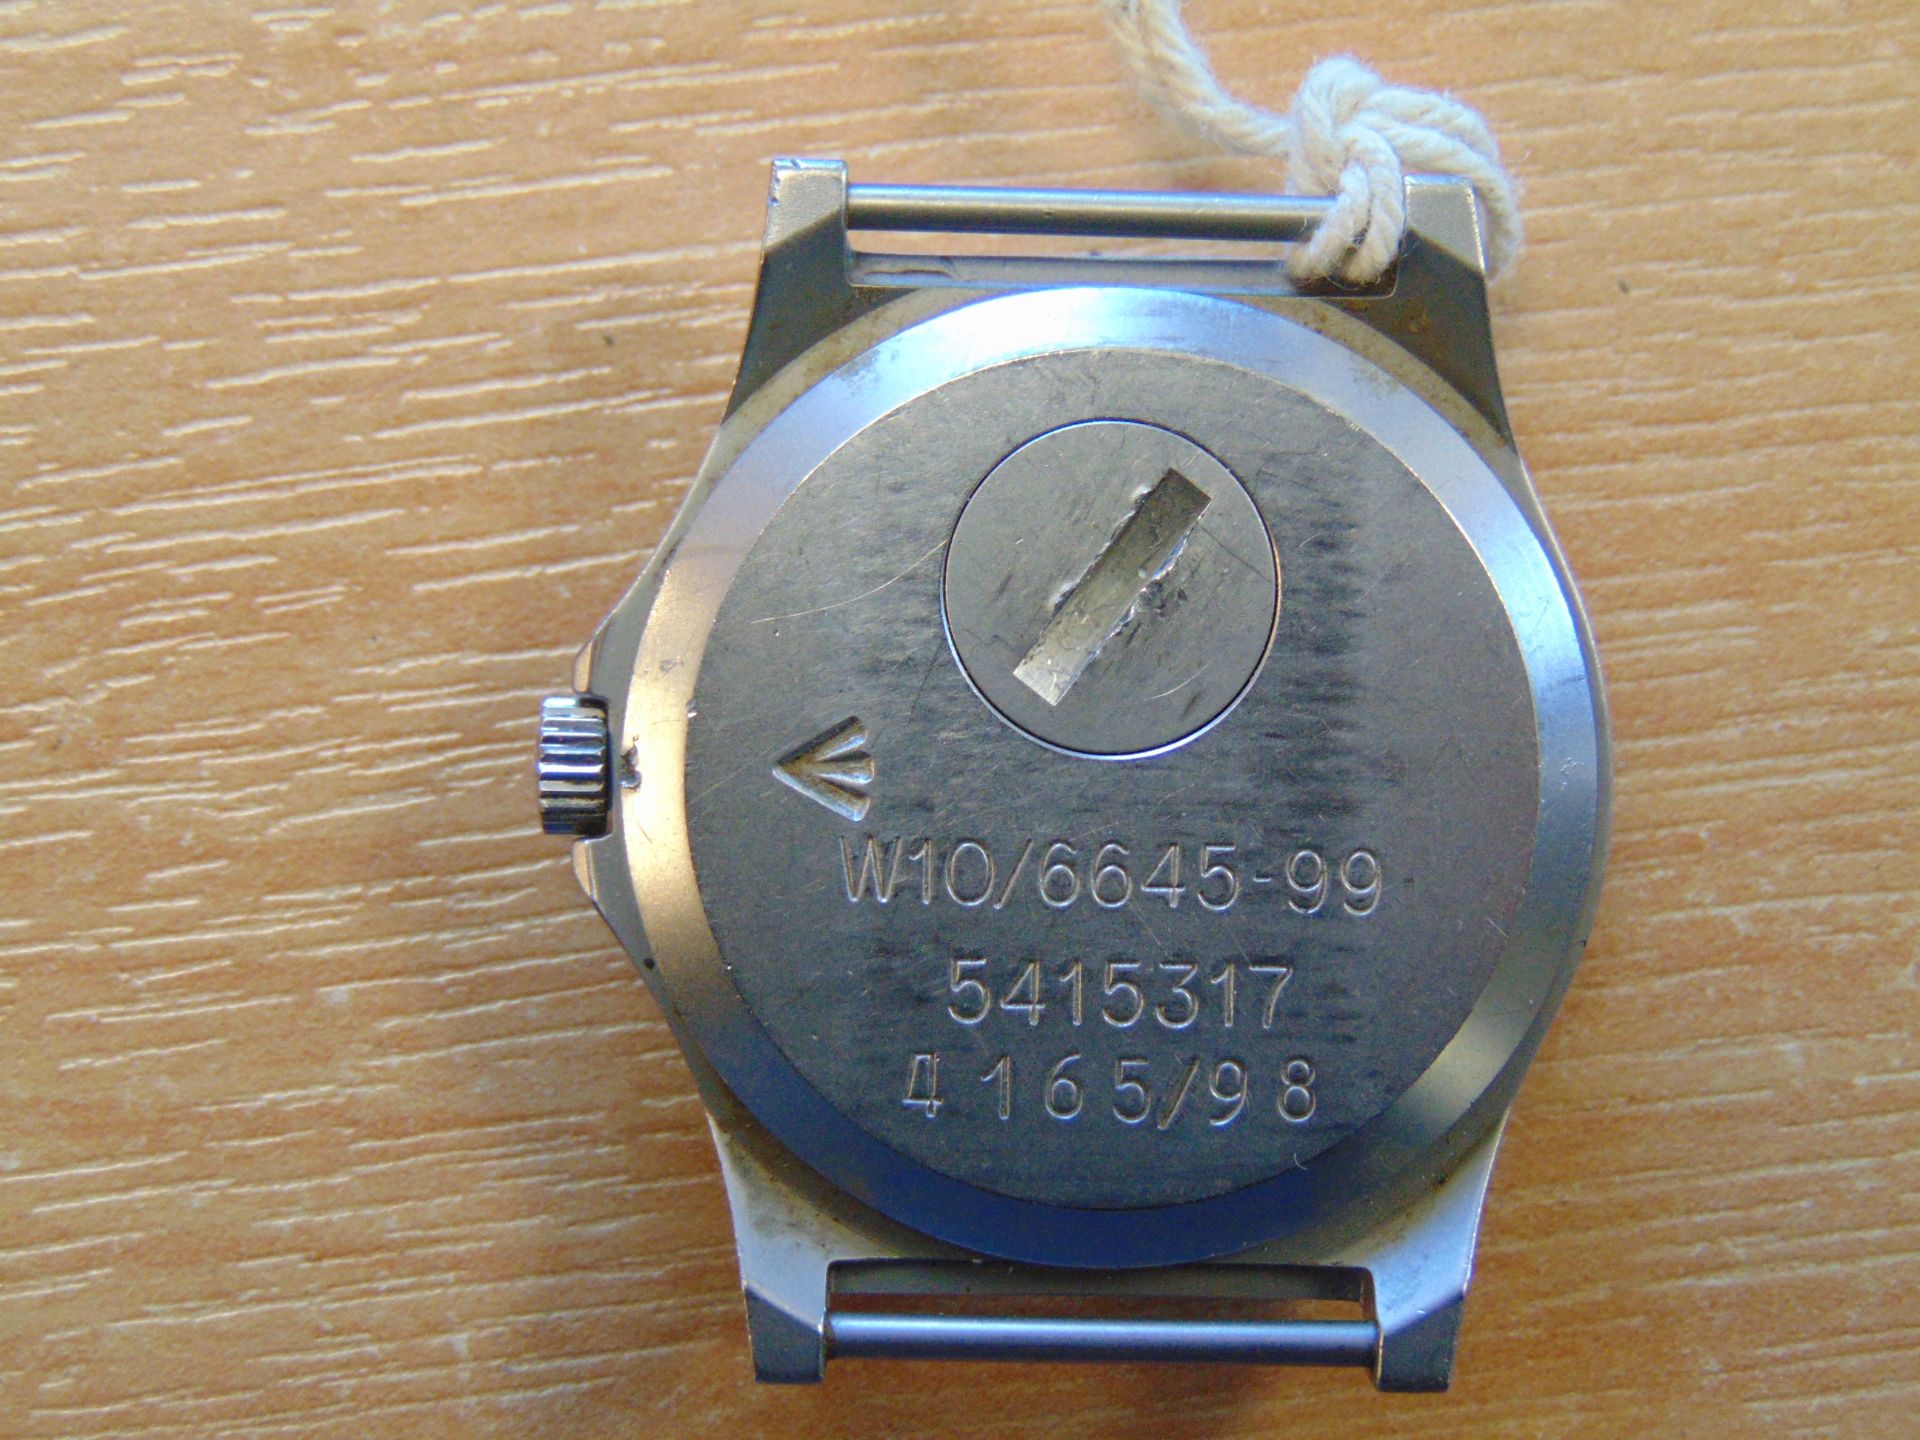 CWC W10 BRITISH ARMY ISSUE SERVICE WATCH NATO MARKS DATE 1998 - Image 5 of 5